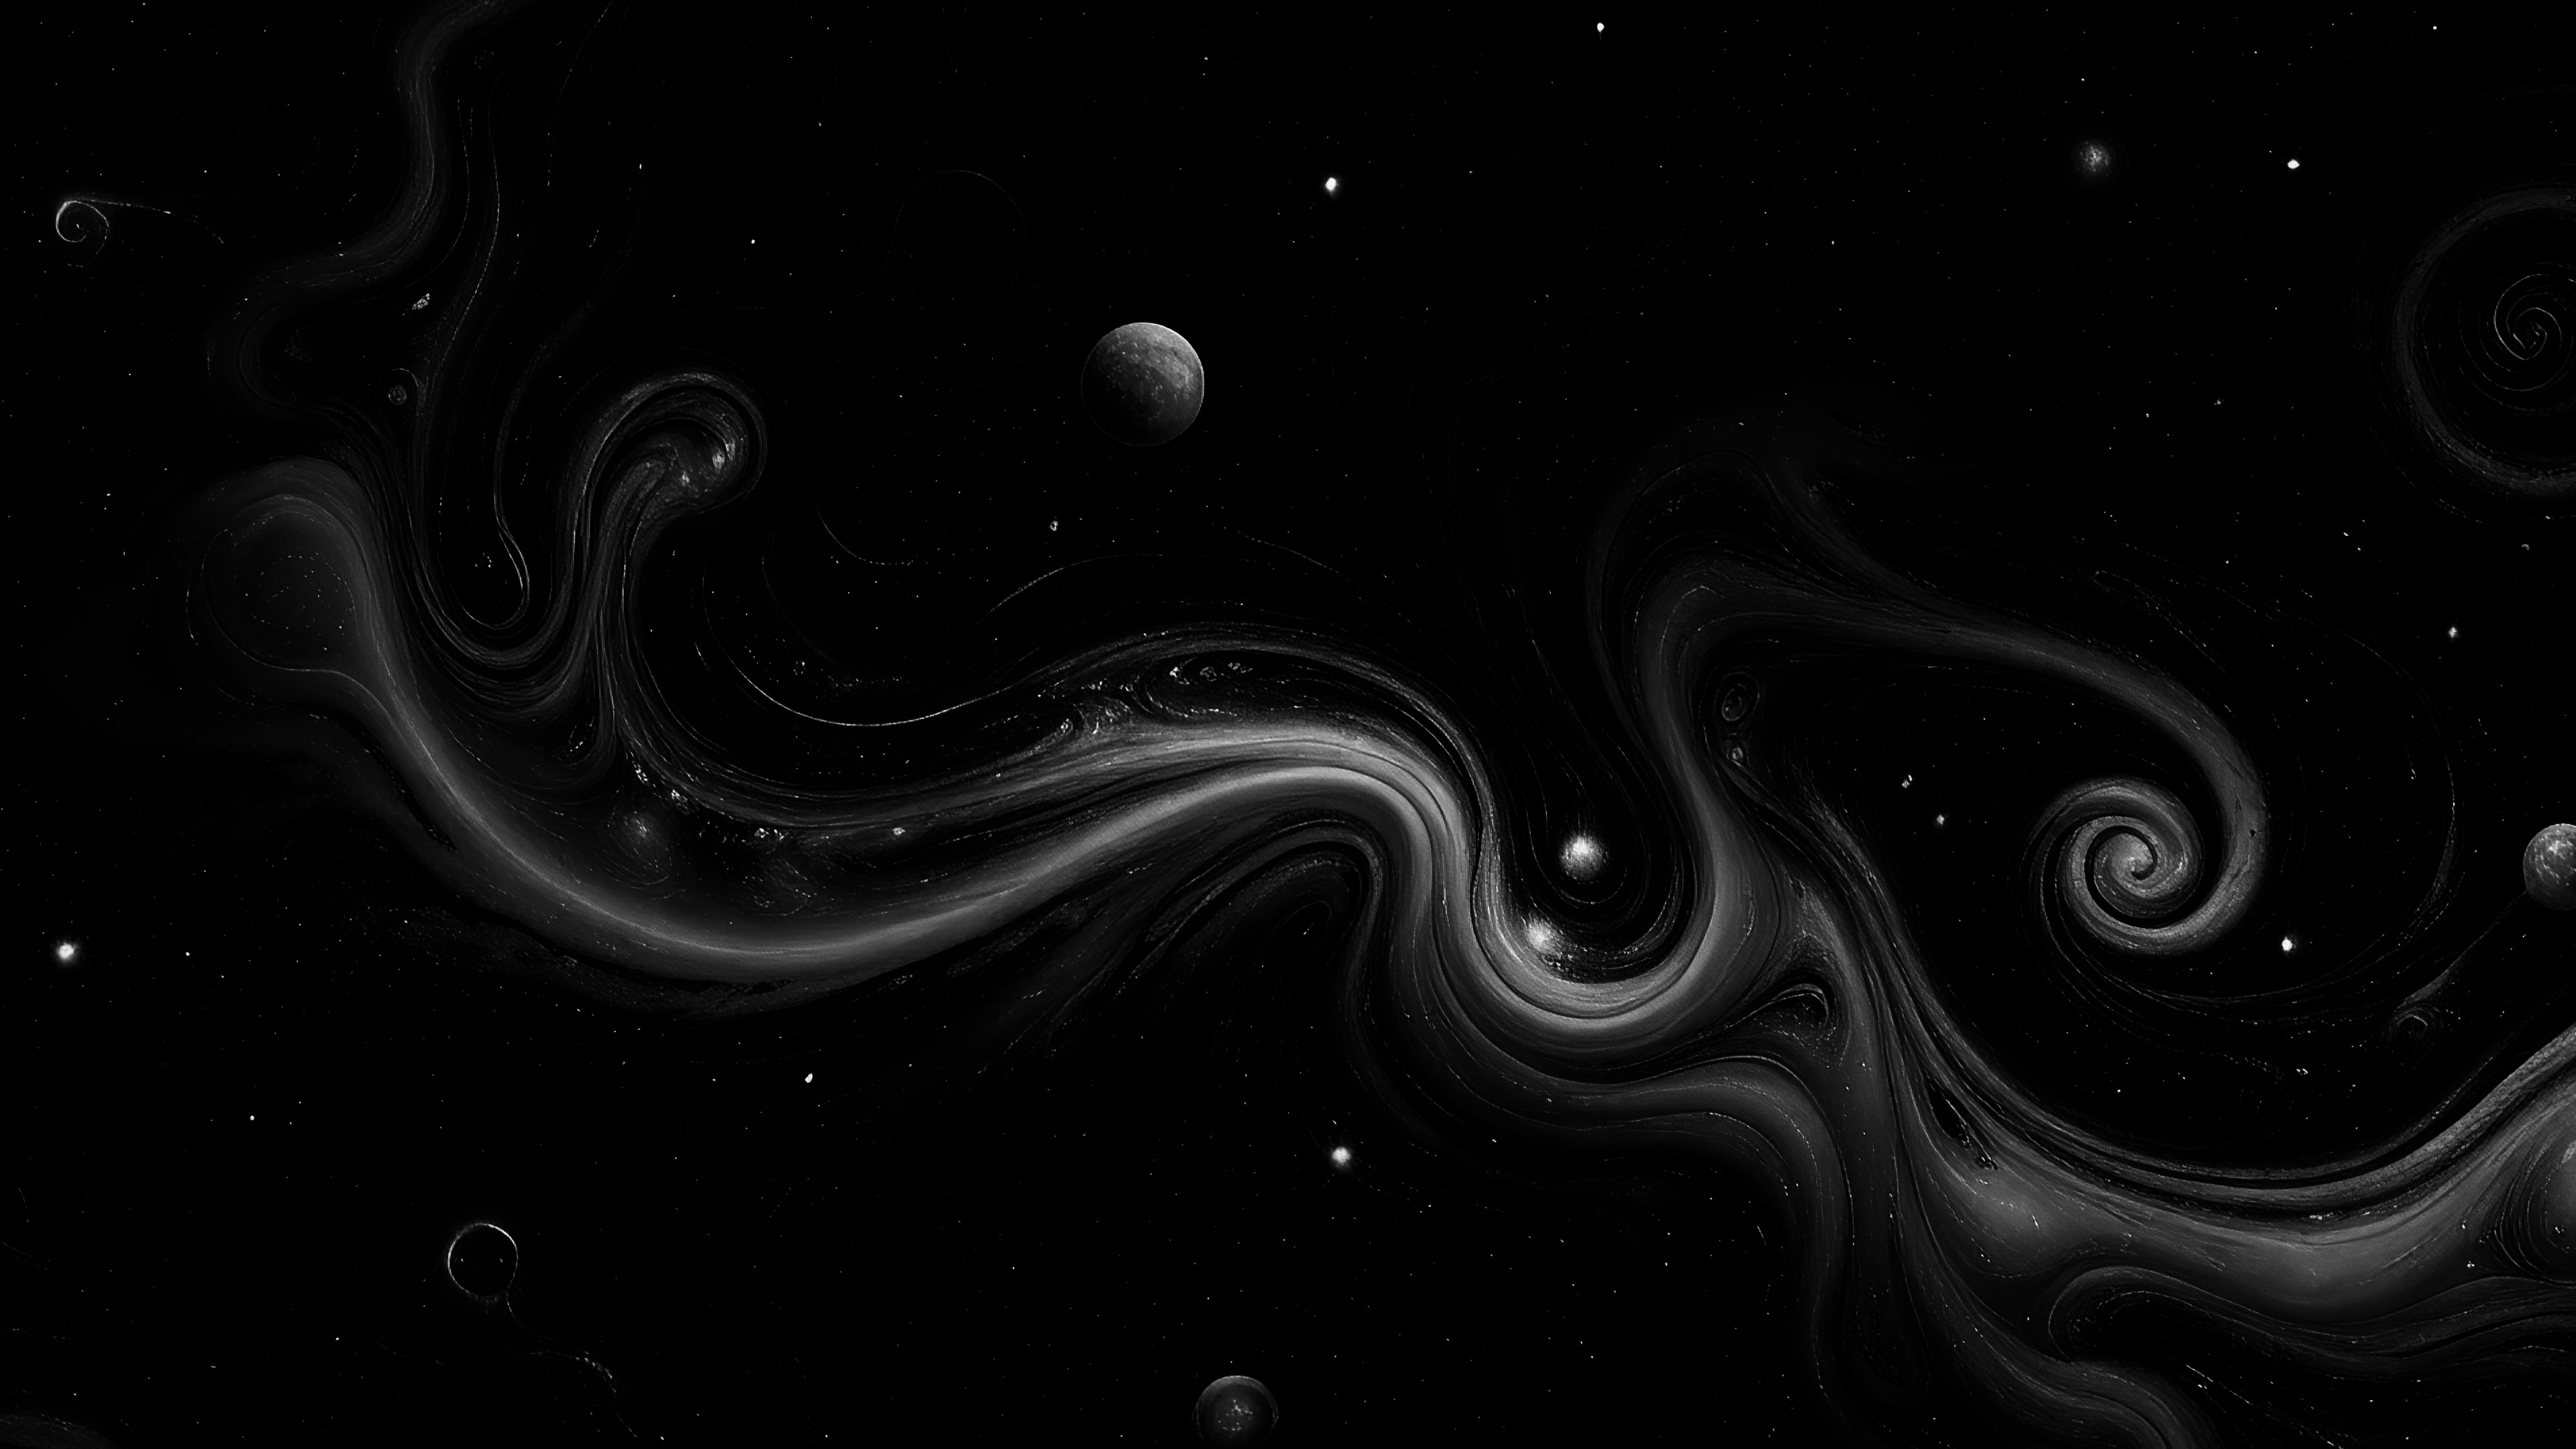 Transport your tablet into the cosmos with dark abstract tablet wallpaper, inspired by celestial bodies and showcasing cosmic swirls, nebulae-like patterns, and deep space colors.